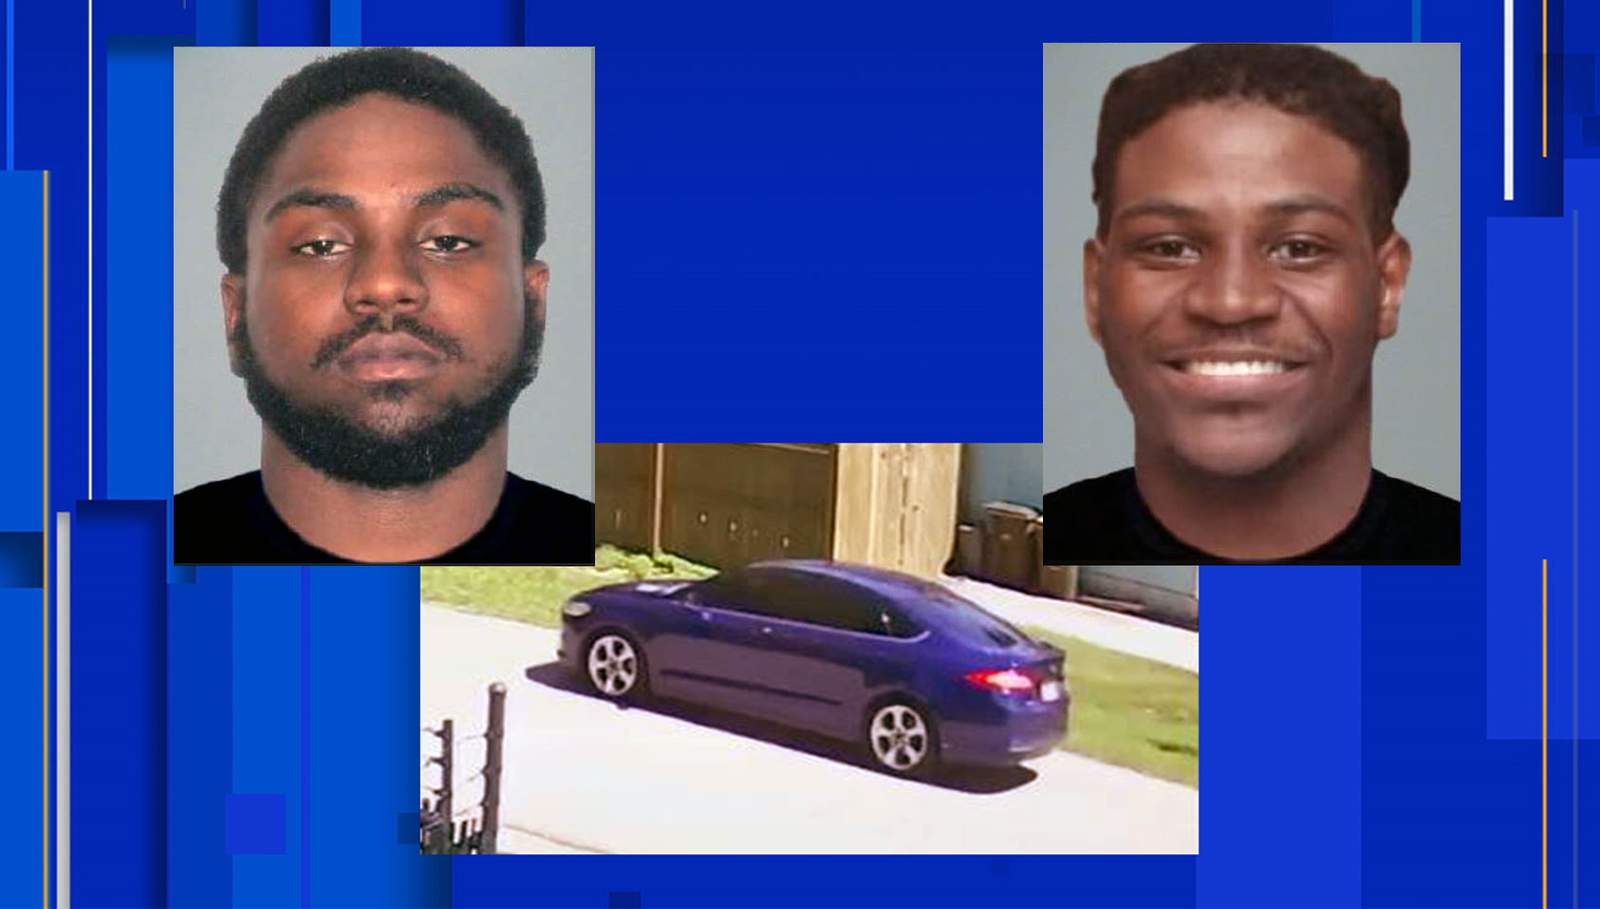 2 men wanted for questioning about gunfire in Atlantic Beach